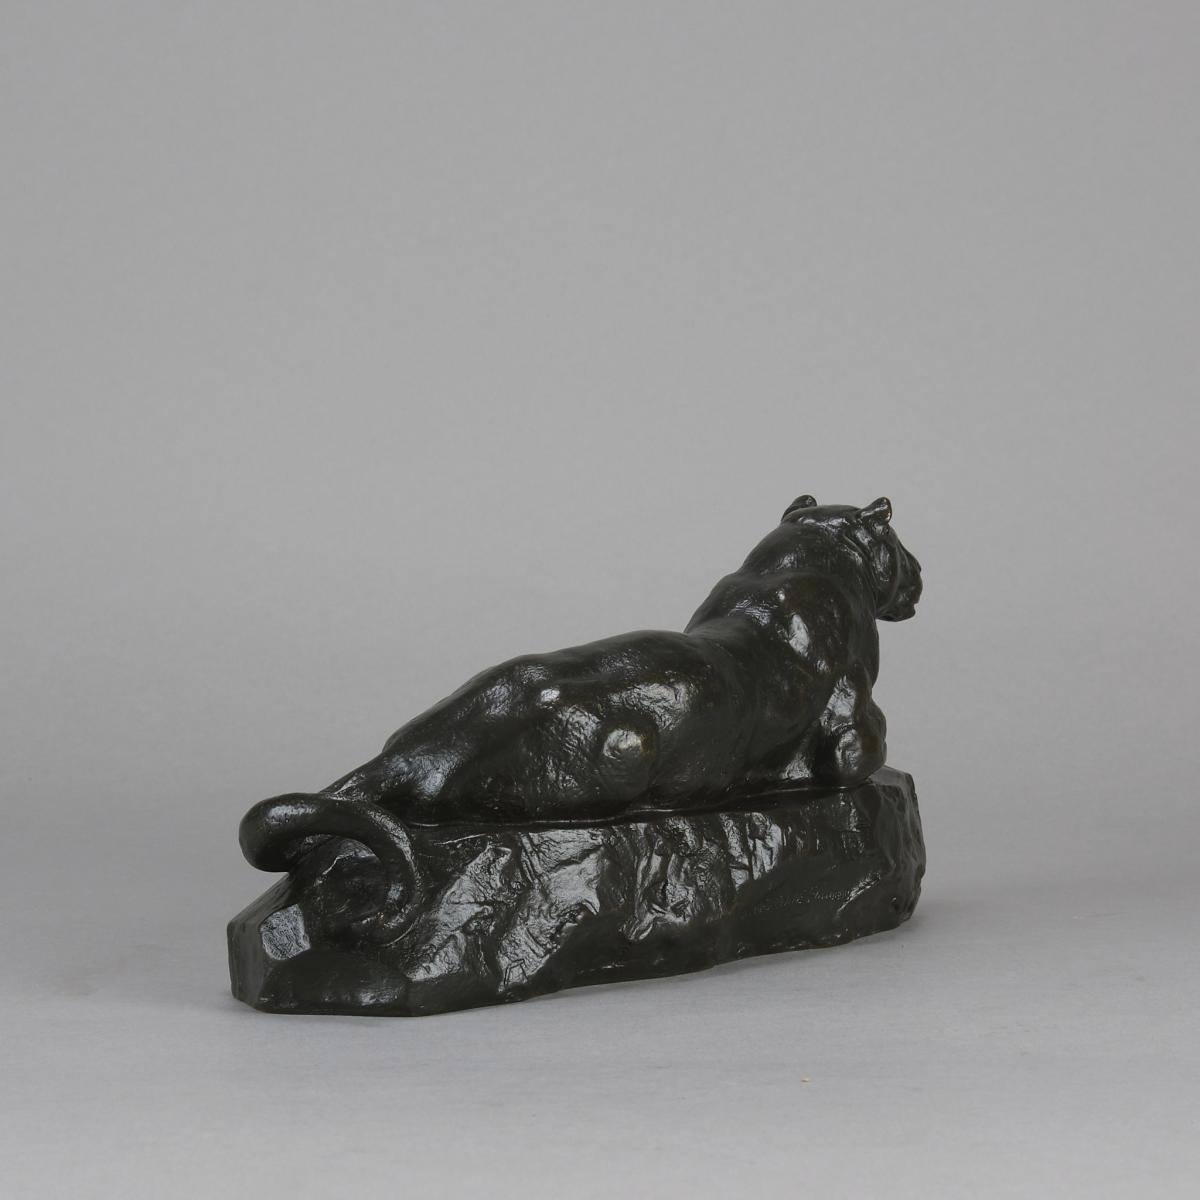 19th Century Animalier Bronze entitled "Panthere de l’Inde" by Antoine L Barye